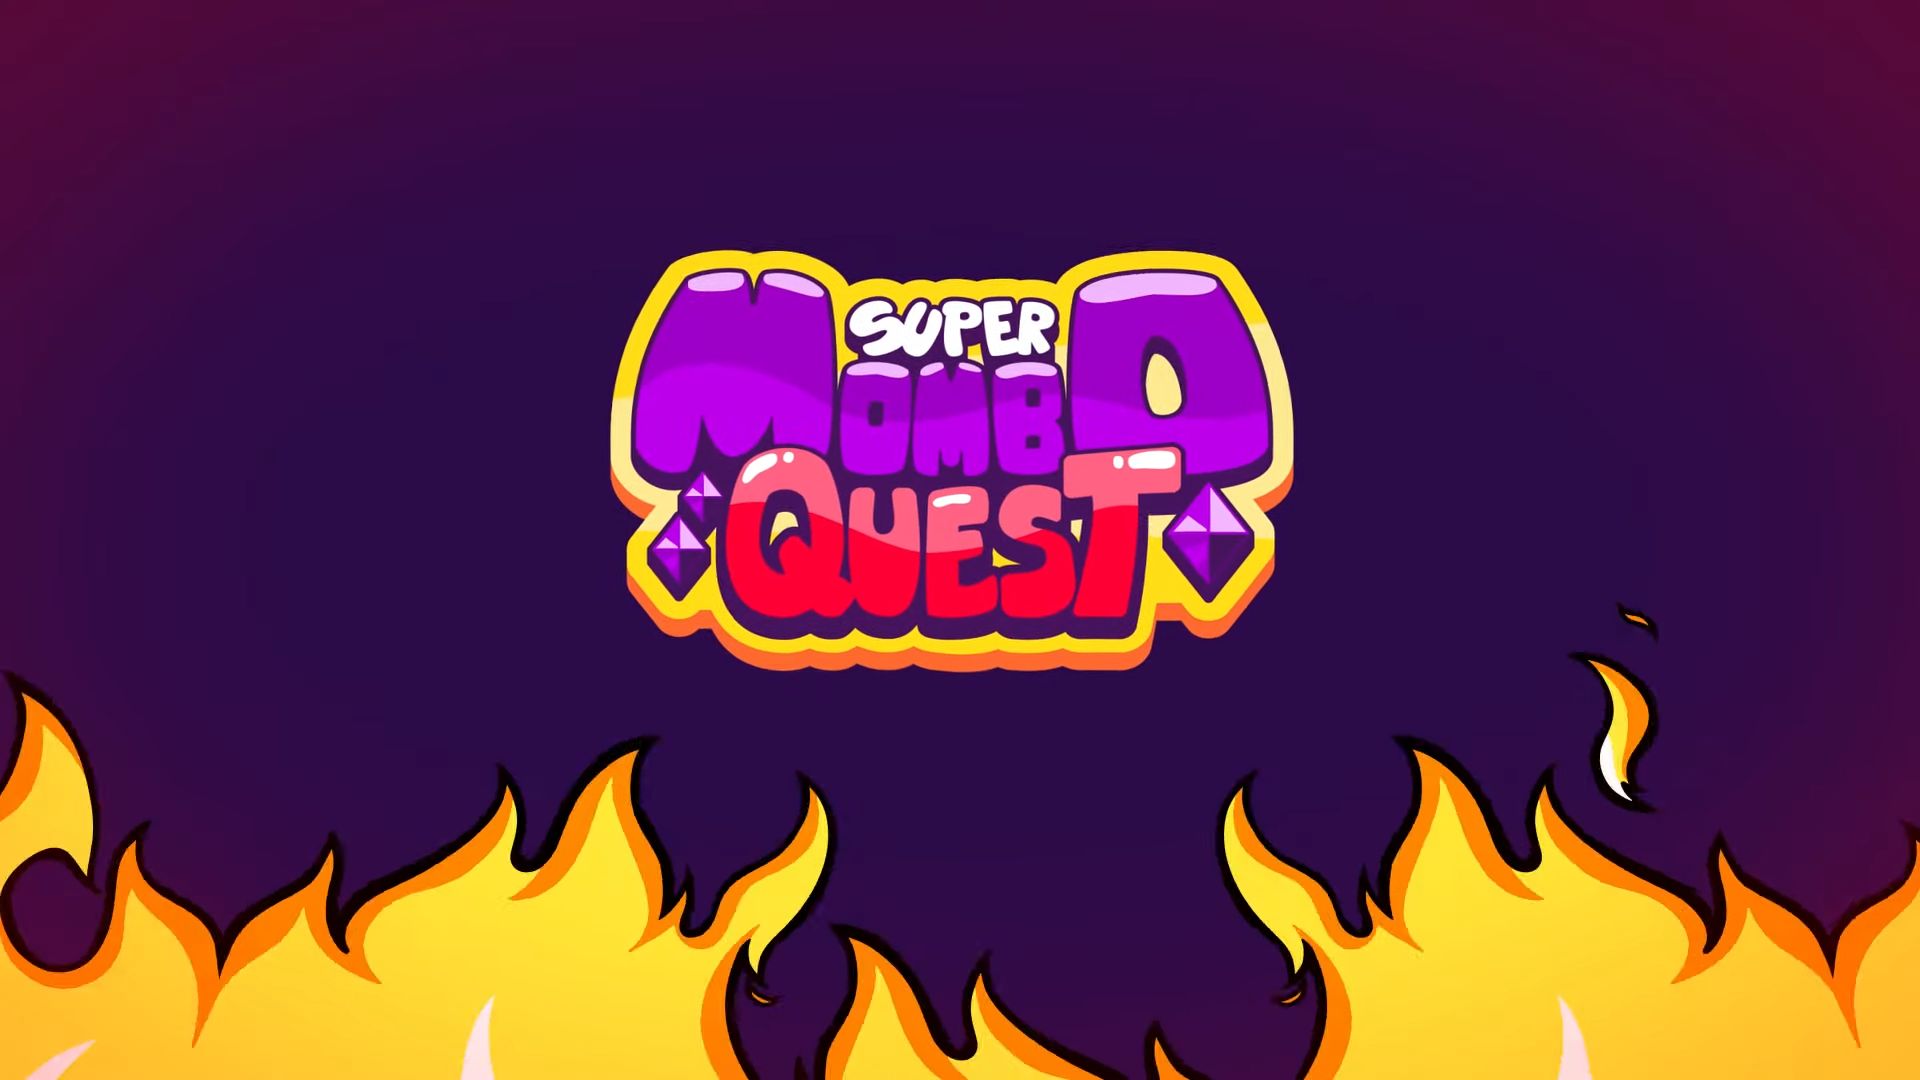 Download Super Mombo Quest Android free game.